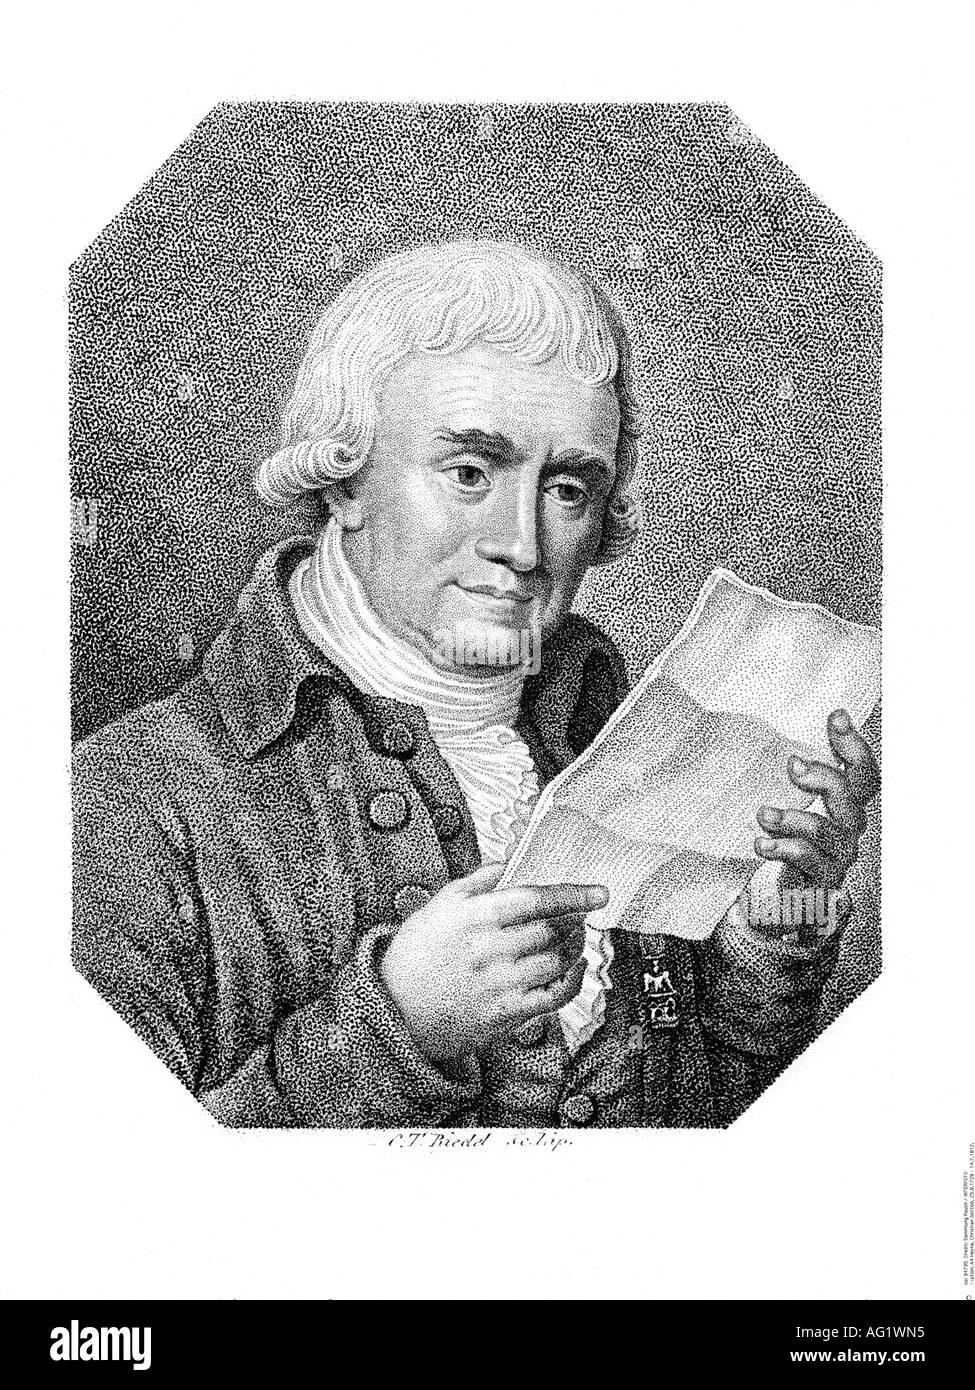 Heyne, Christian Gottlob, 25.9.1729 - 14.7.1812, German philologist, portrait, engraving by C.T. Riedel, circa 1810, linguist, archeologist, librarian, doctor, professor, writer, author, reading letter, , Artist's Copyright has not to be cleared Stock Photo